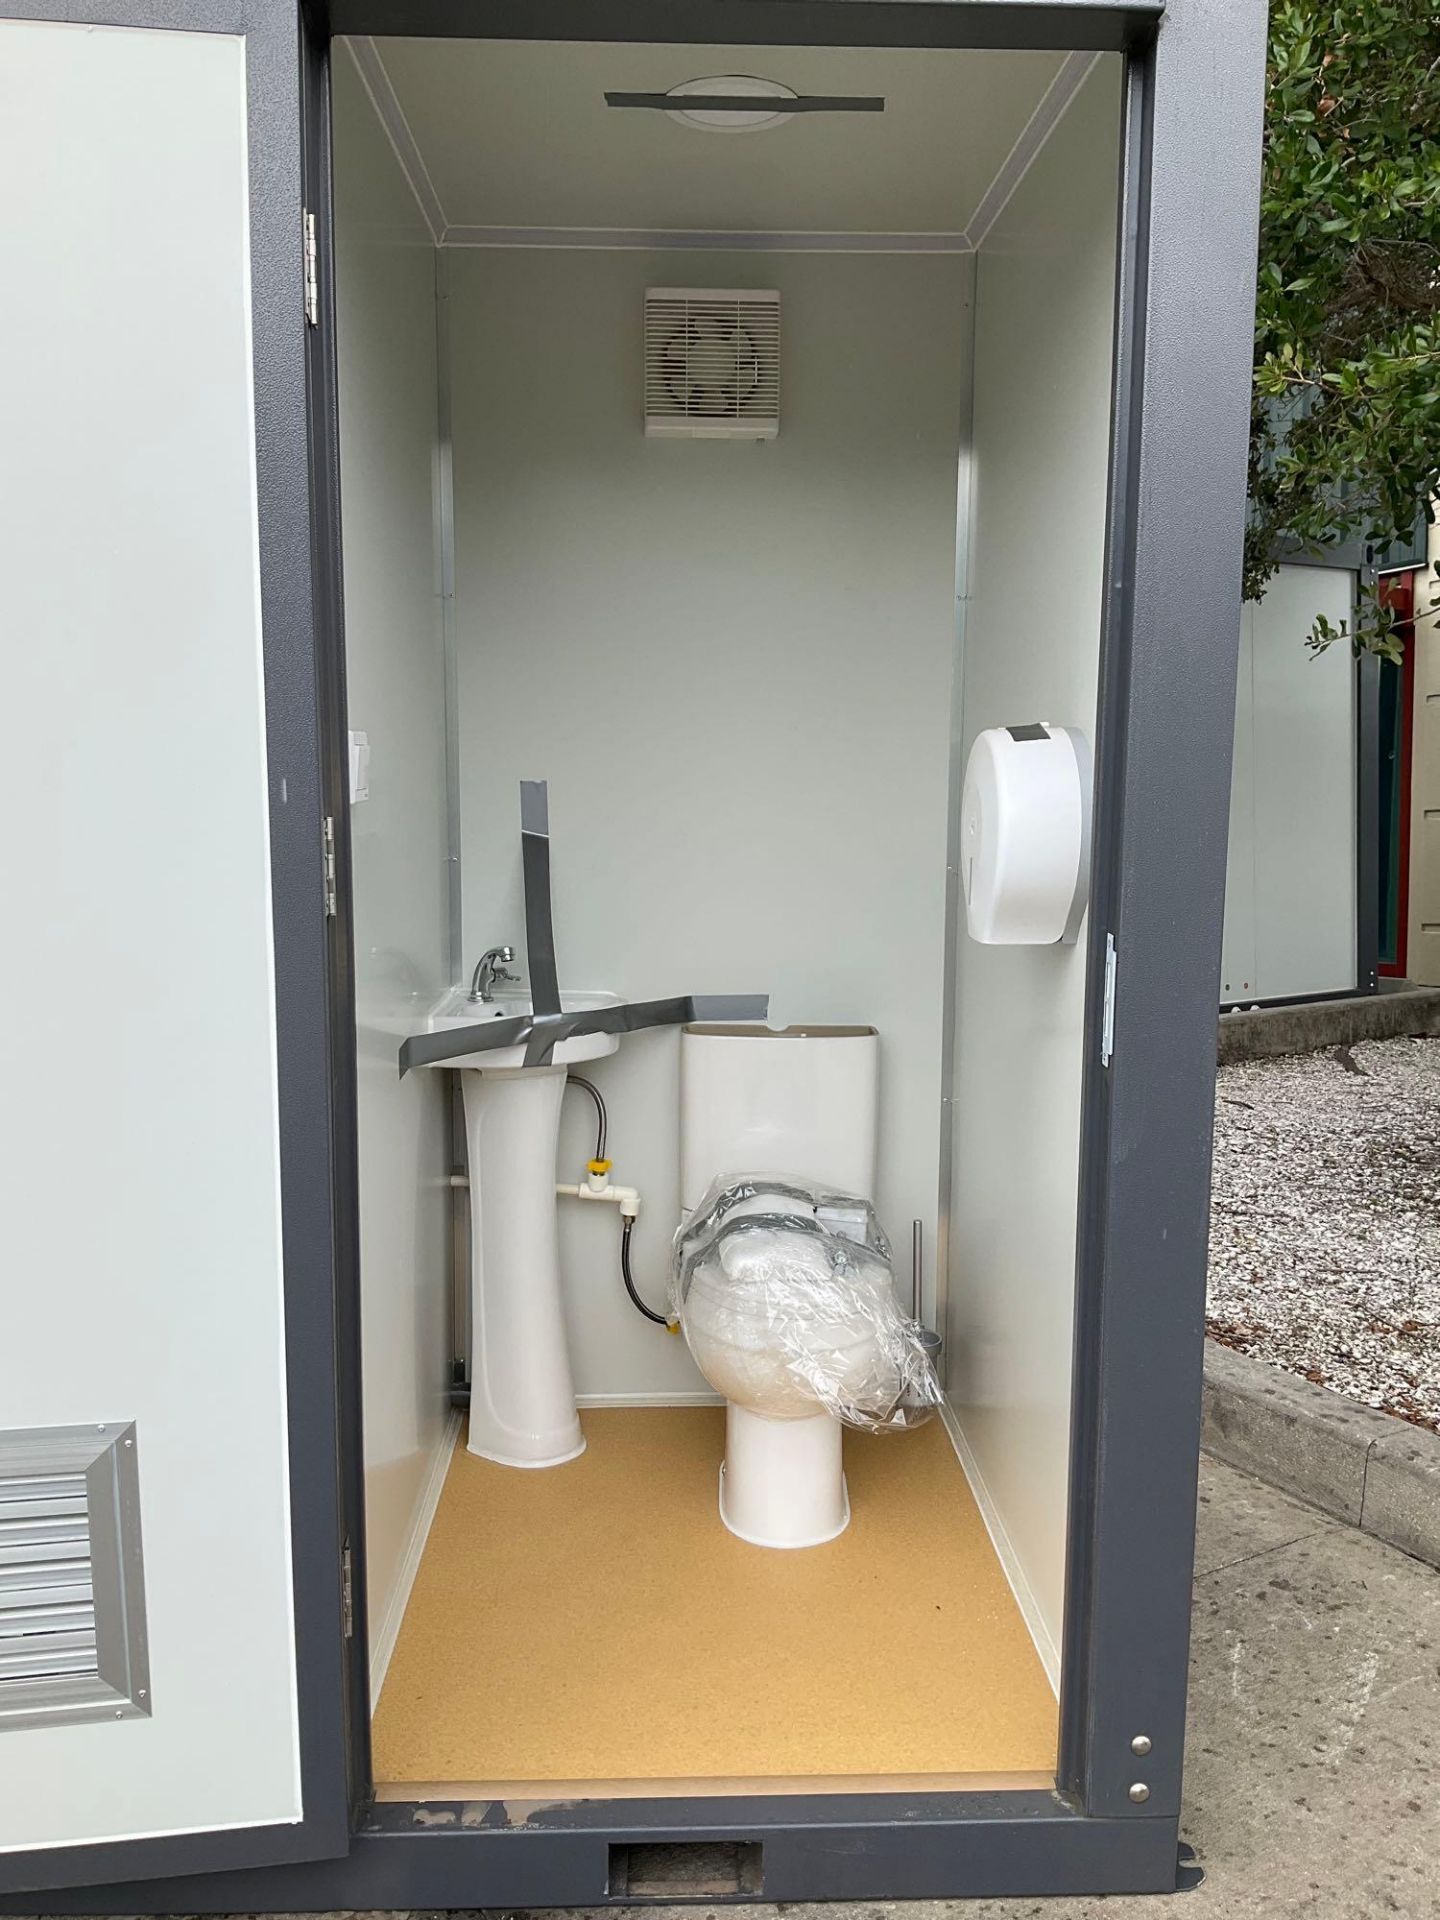 UNUSED PORTABLE DOUBLE BATHROOM UNIT, 2 STALLS, ELECTRIC & PLUMBING HOOK UP WITH EXTERIOR PLUMBING C - Image 10 of 16